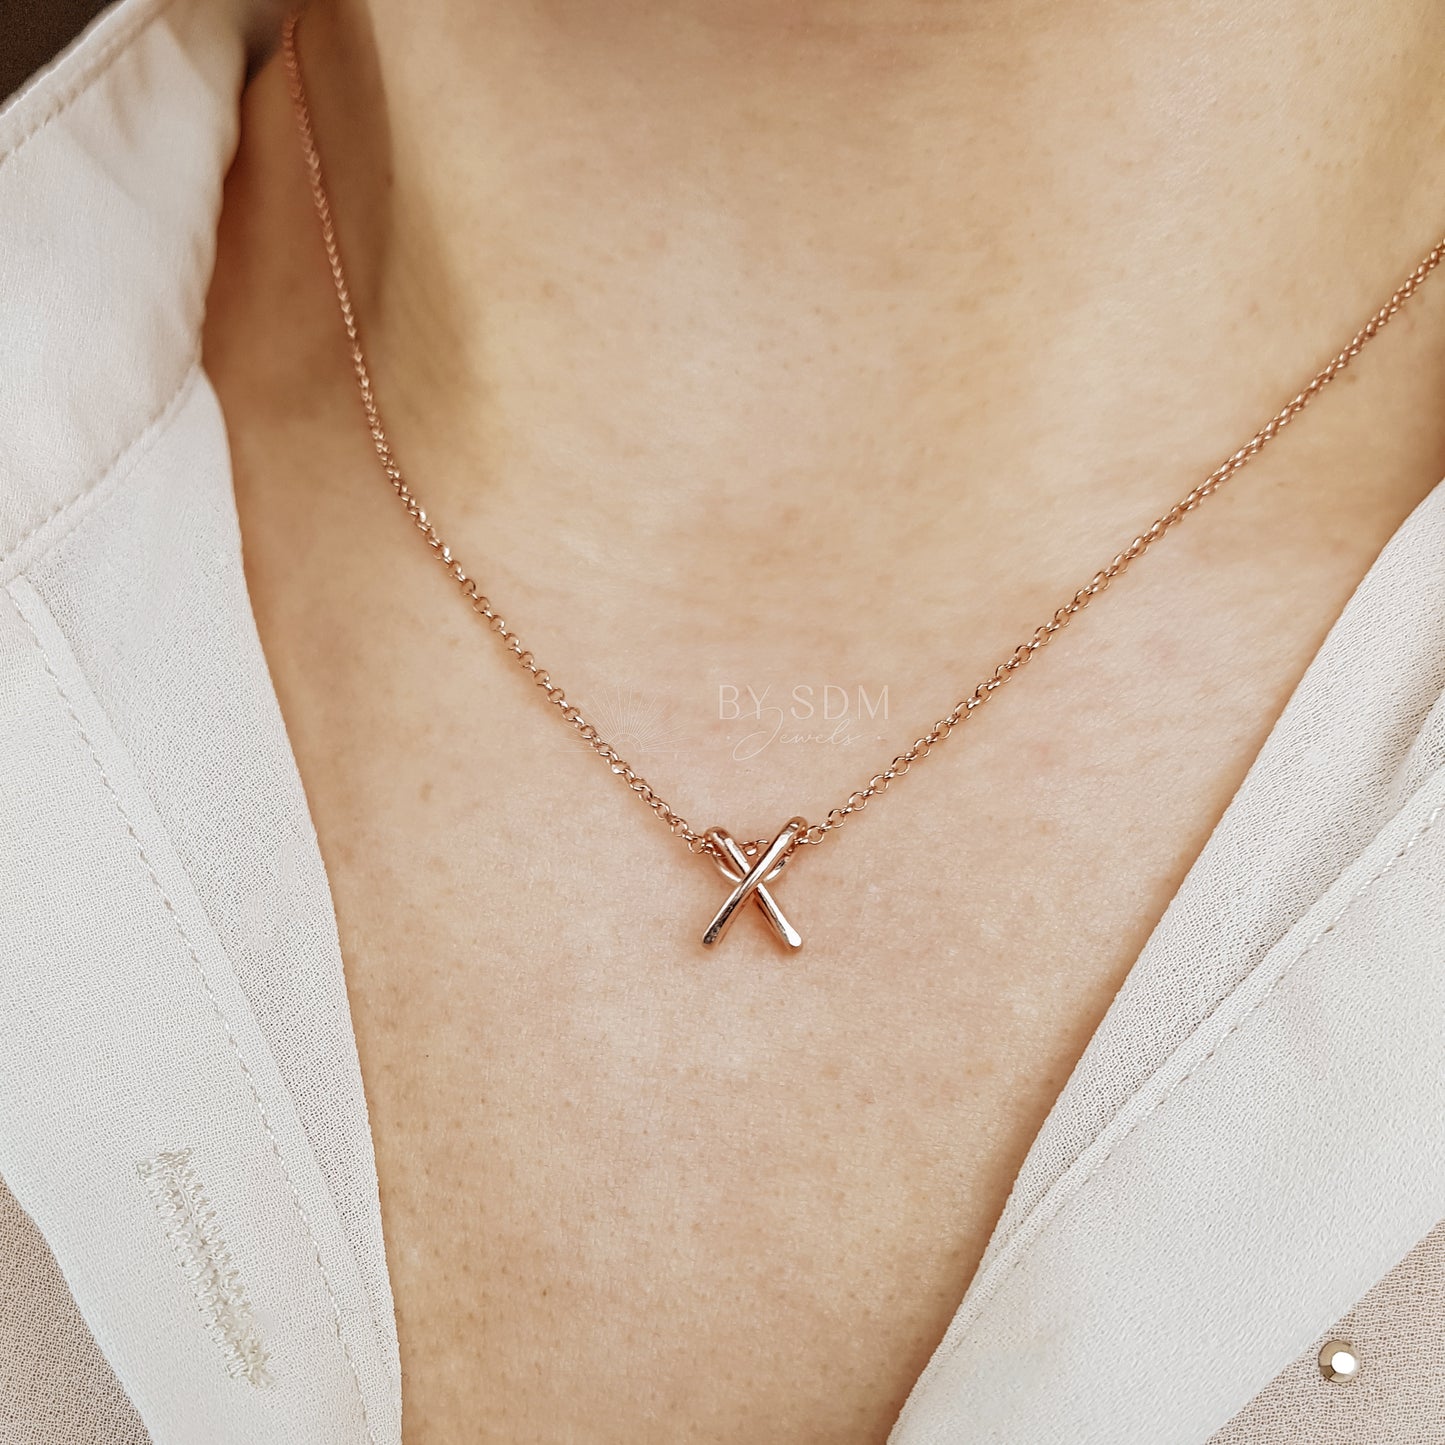 X Initial Necklace • Personalized Necklace • Perfect Dainty Necklace for Her • Bridesmaid Gifts • Personalized Gift Custom Charm Necklace